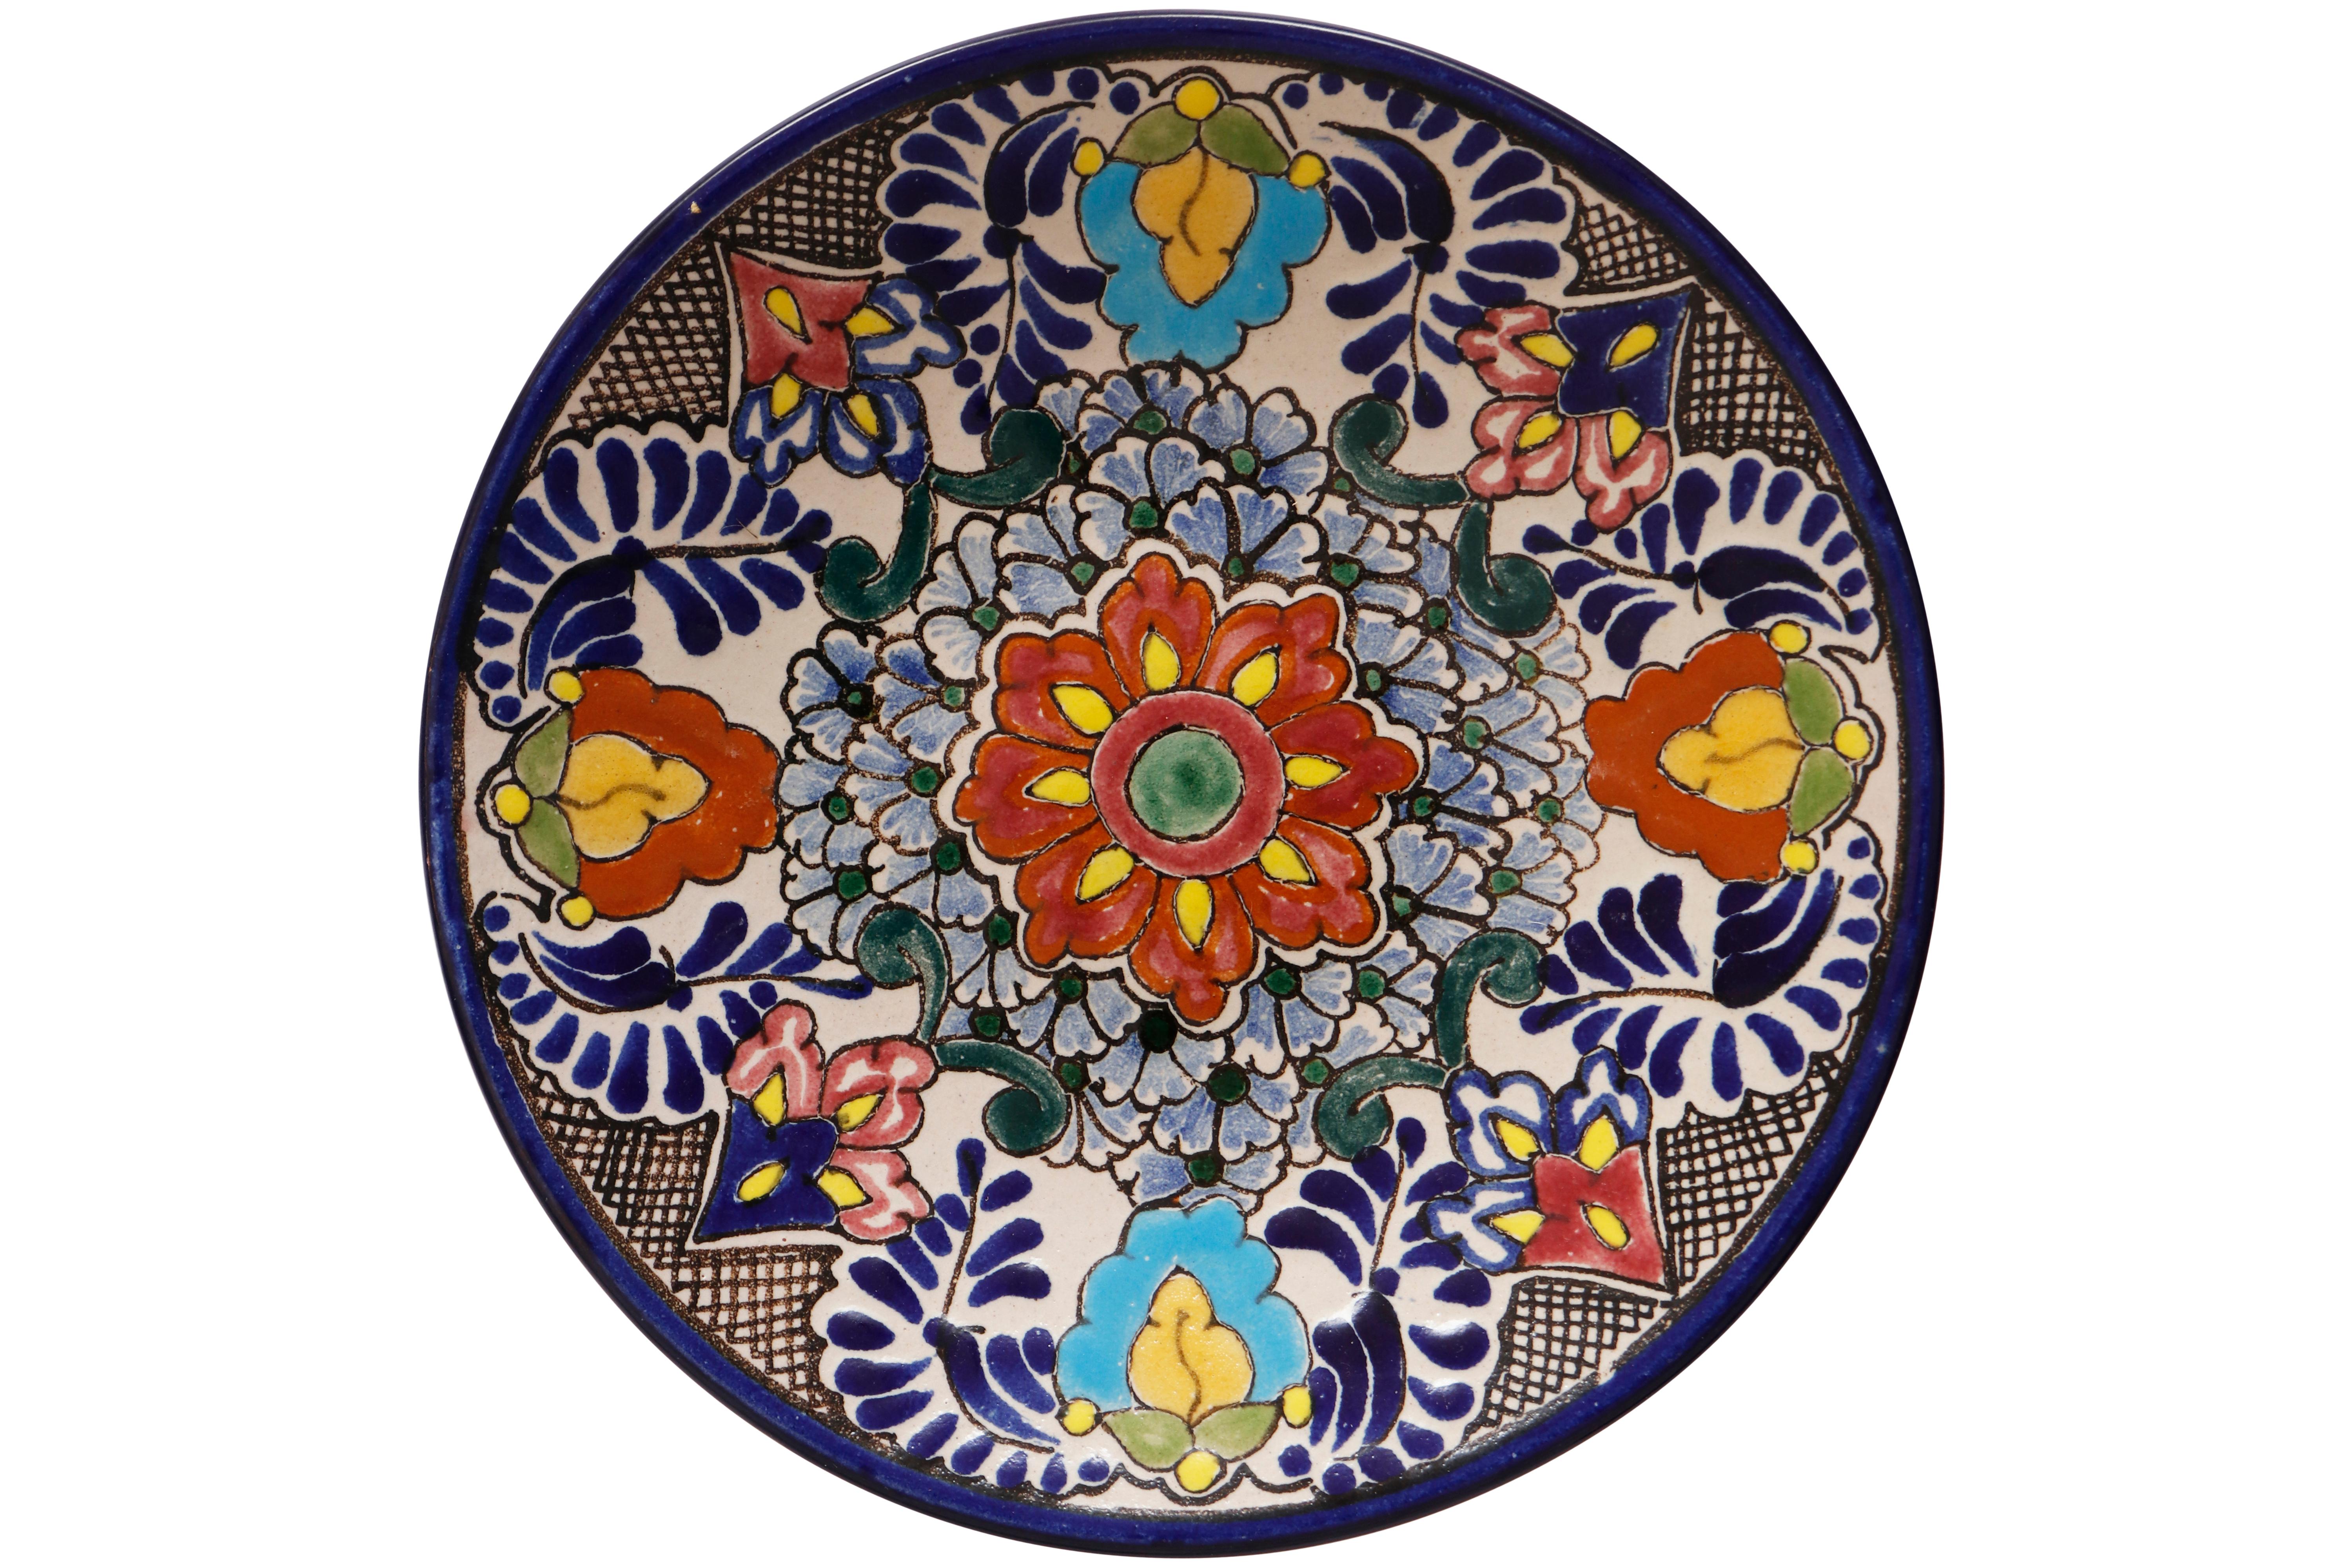 A set of eight hand painted Talavera plates. Each plate is decorated with a different raised floral motif in bold colors, finished with a cobalt blue rim. Plates are signed “Talavera, Loza Blanca, Puebla Mexico” in the back with holes for hanging.